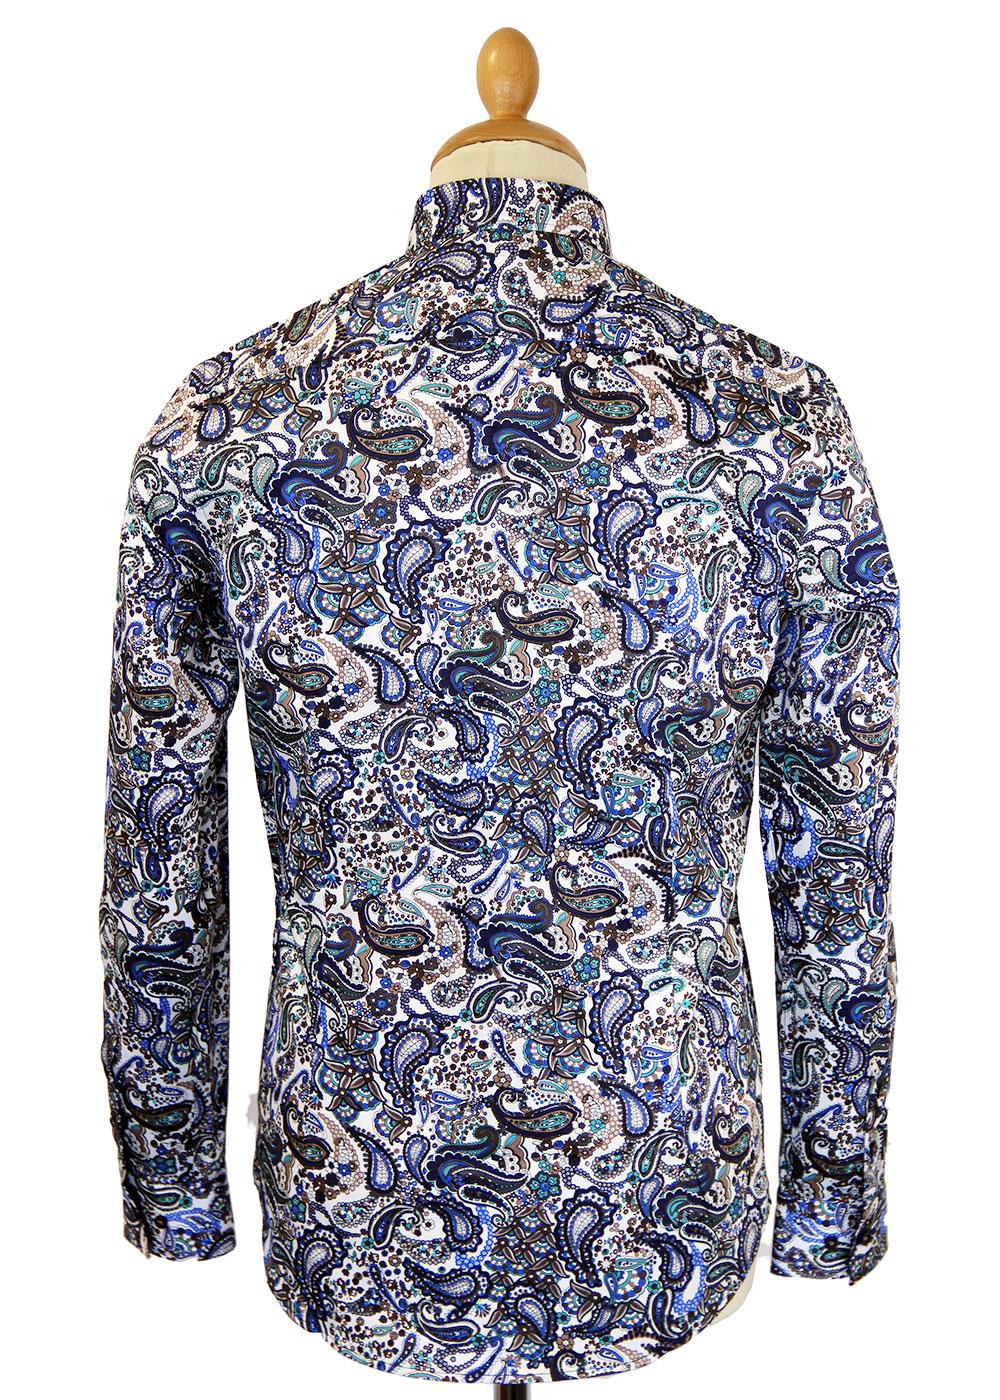 GUIDE LONDON Floral Multi Paisley Retro 60s Mod Shirt in Navy